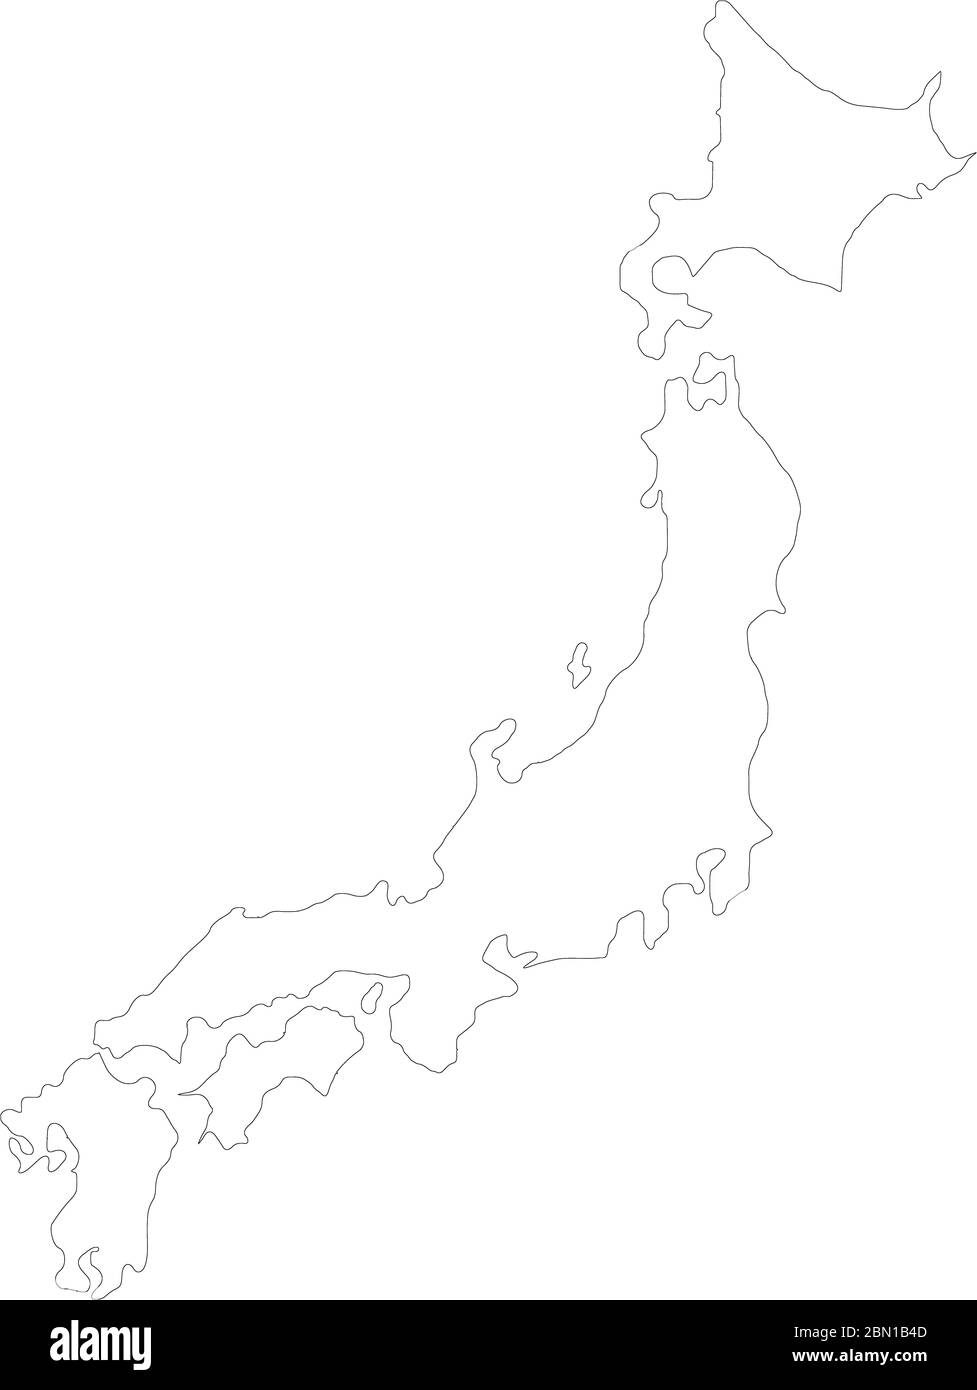 Map of Japan filled with white color Stock Photo